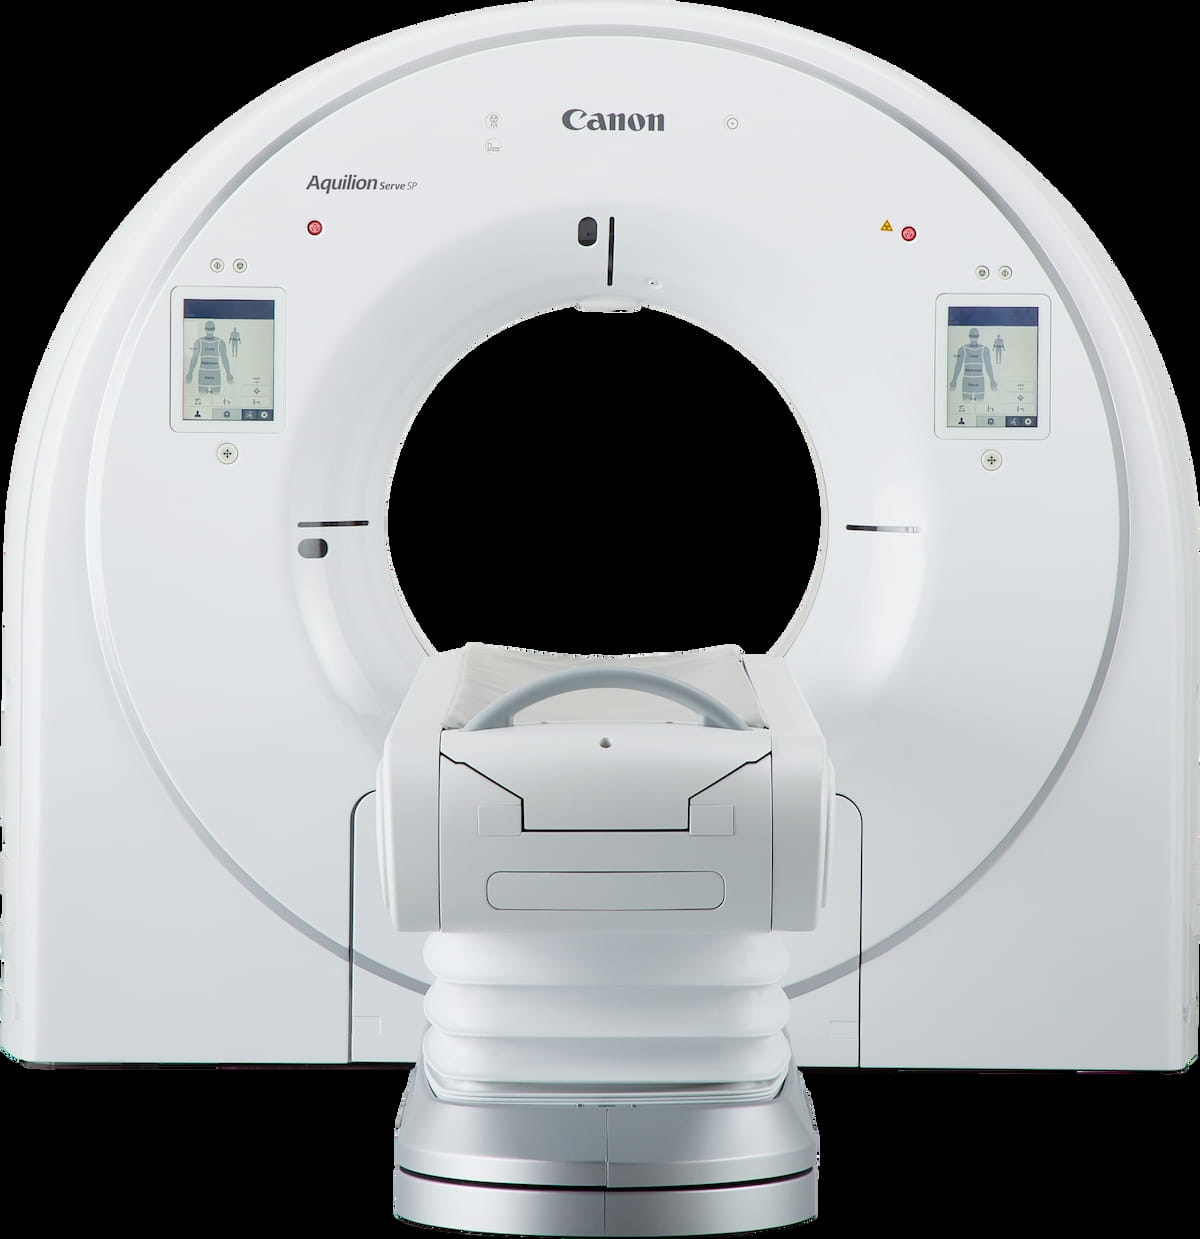 Canon Medical Systems Debuts New CT Systems at RSNA Conference